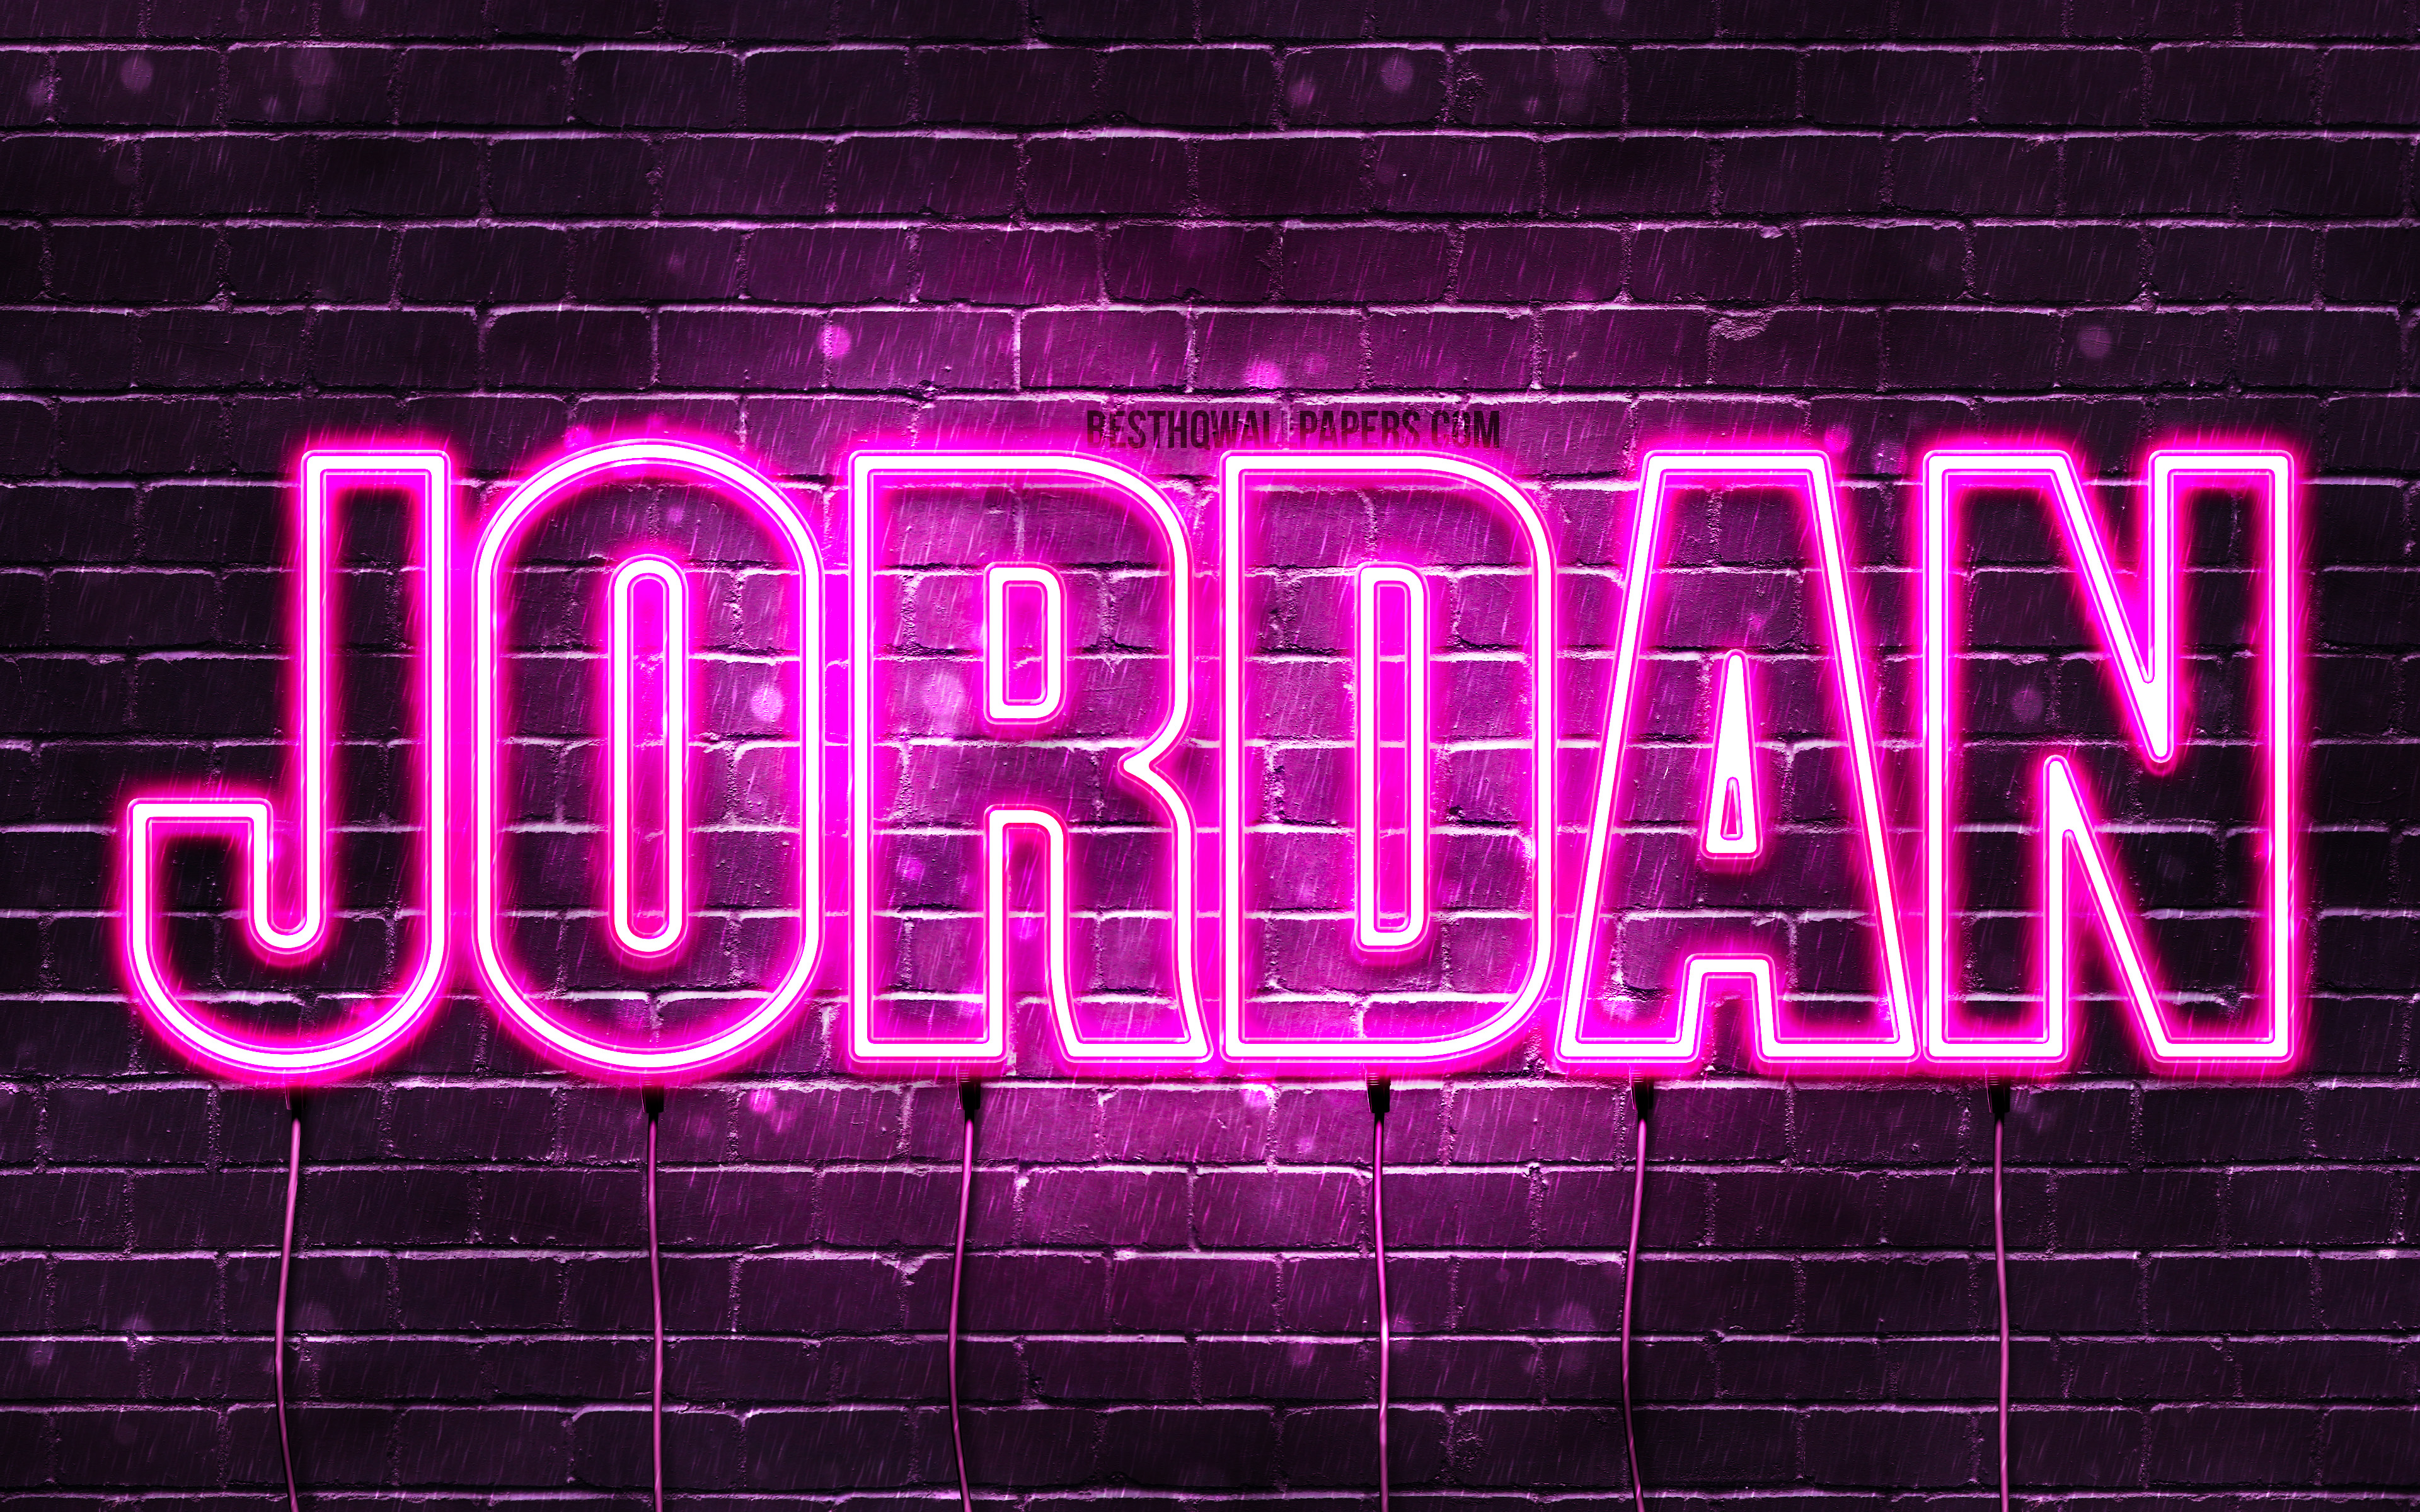 Download wallpaper Jordan, 4k, wallpaper with names, female names, Jordan name, purple neon lights, horizontal text, picture with Jordan name for desktop with resolution 3840x2400. High Quality HD picture wallpaper